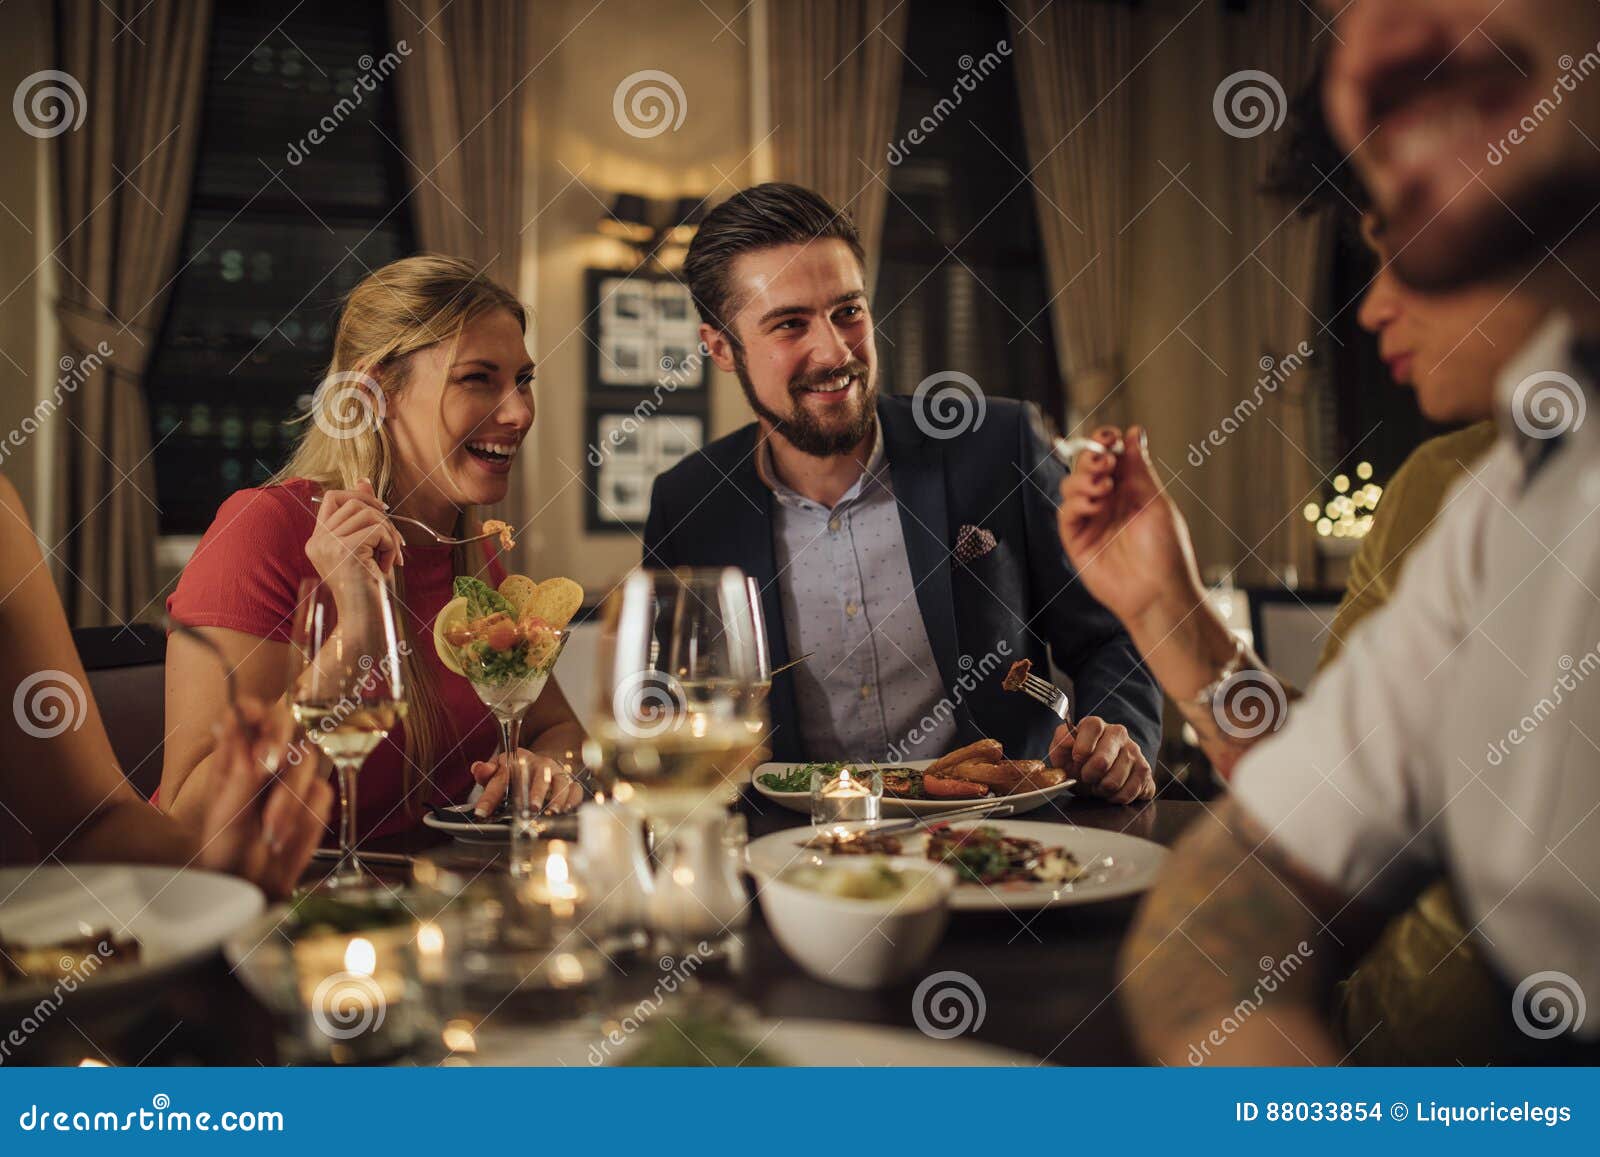 couple at a restaurant meal